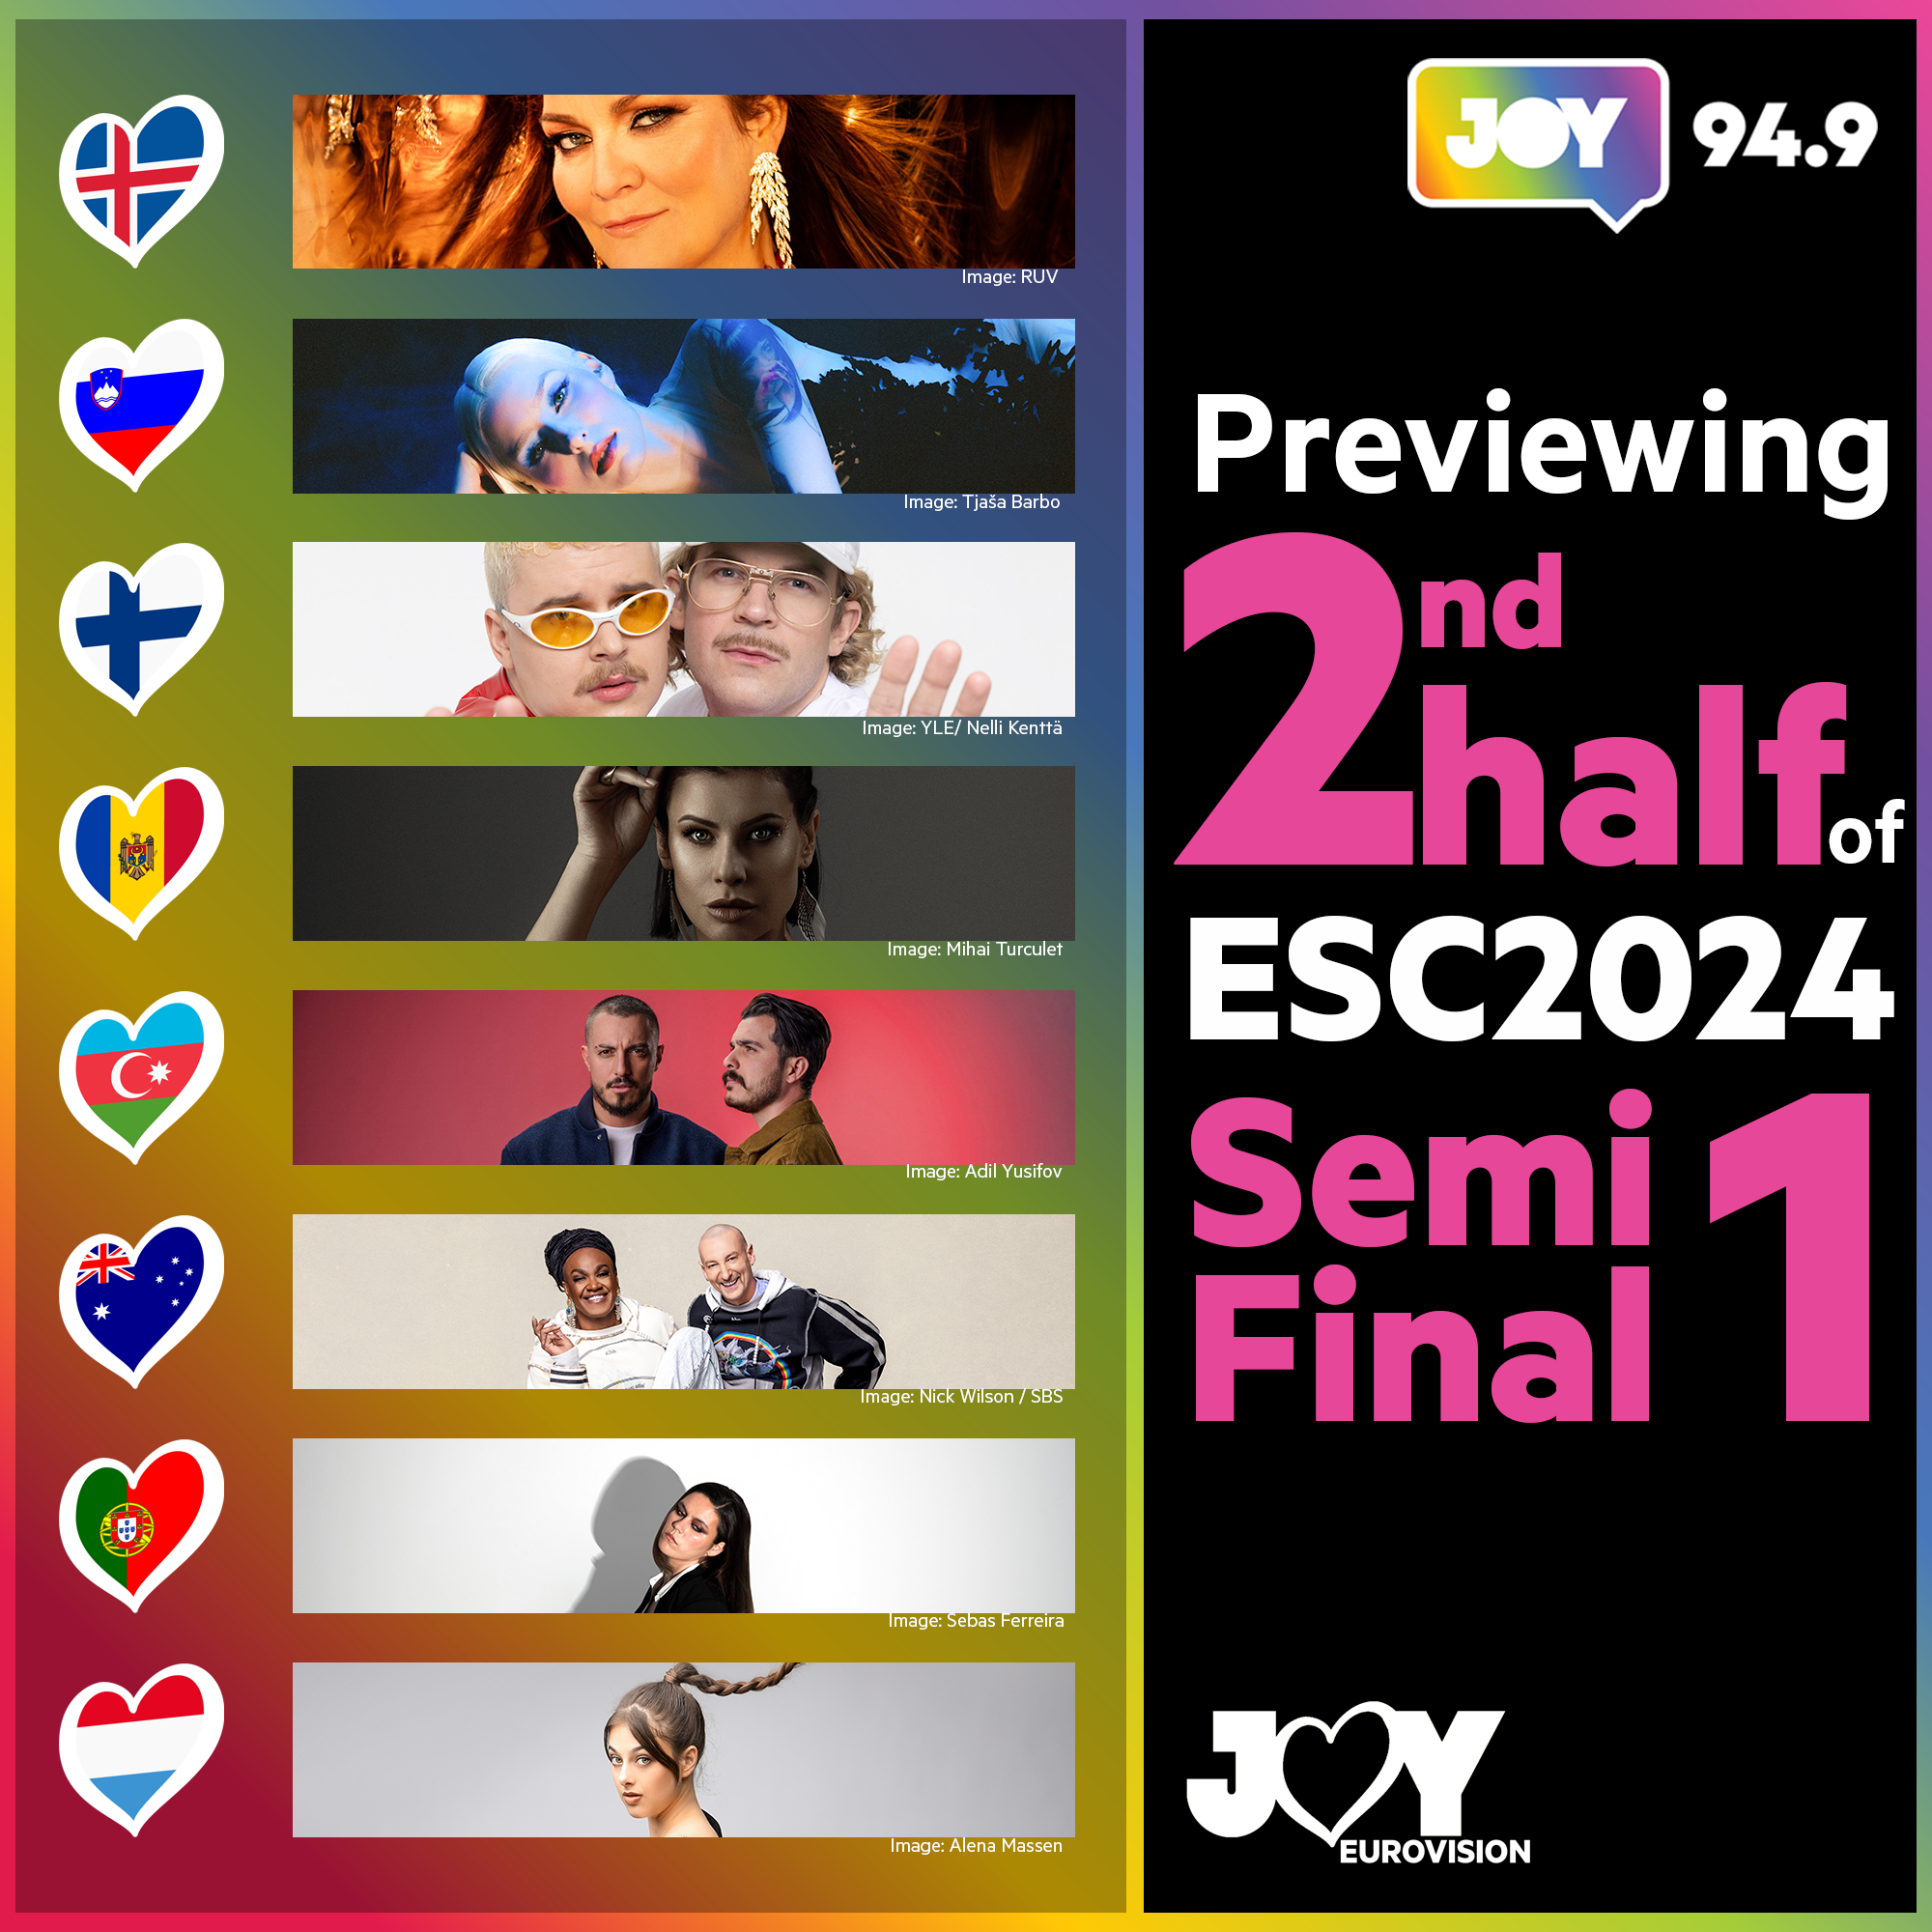 Previewing the second half of Eurovision 2024 Semi Final 1